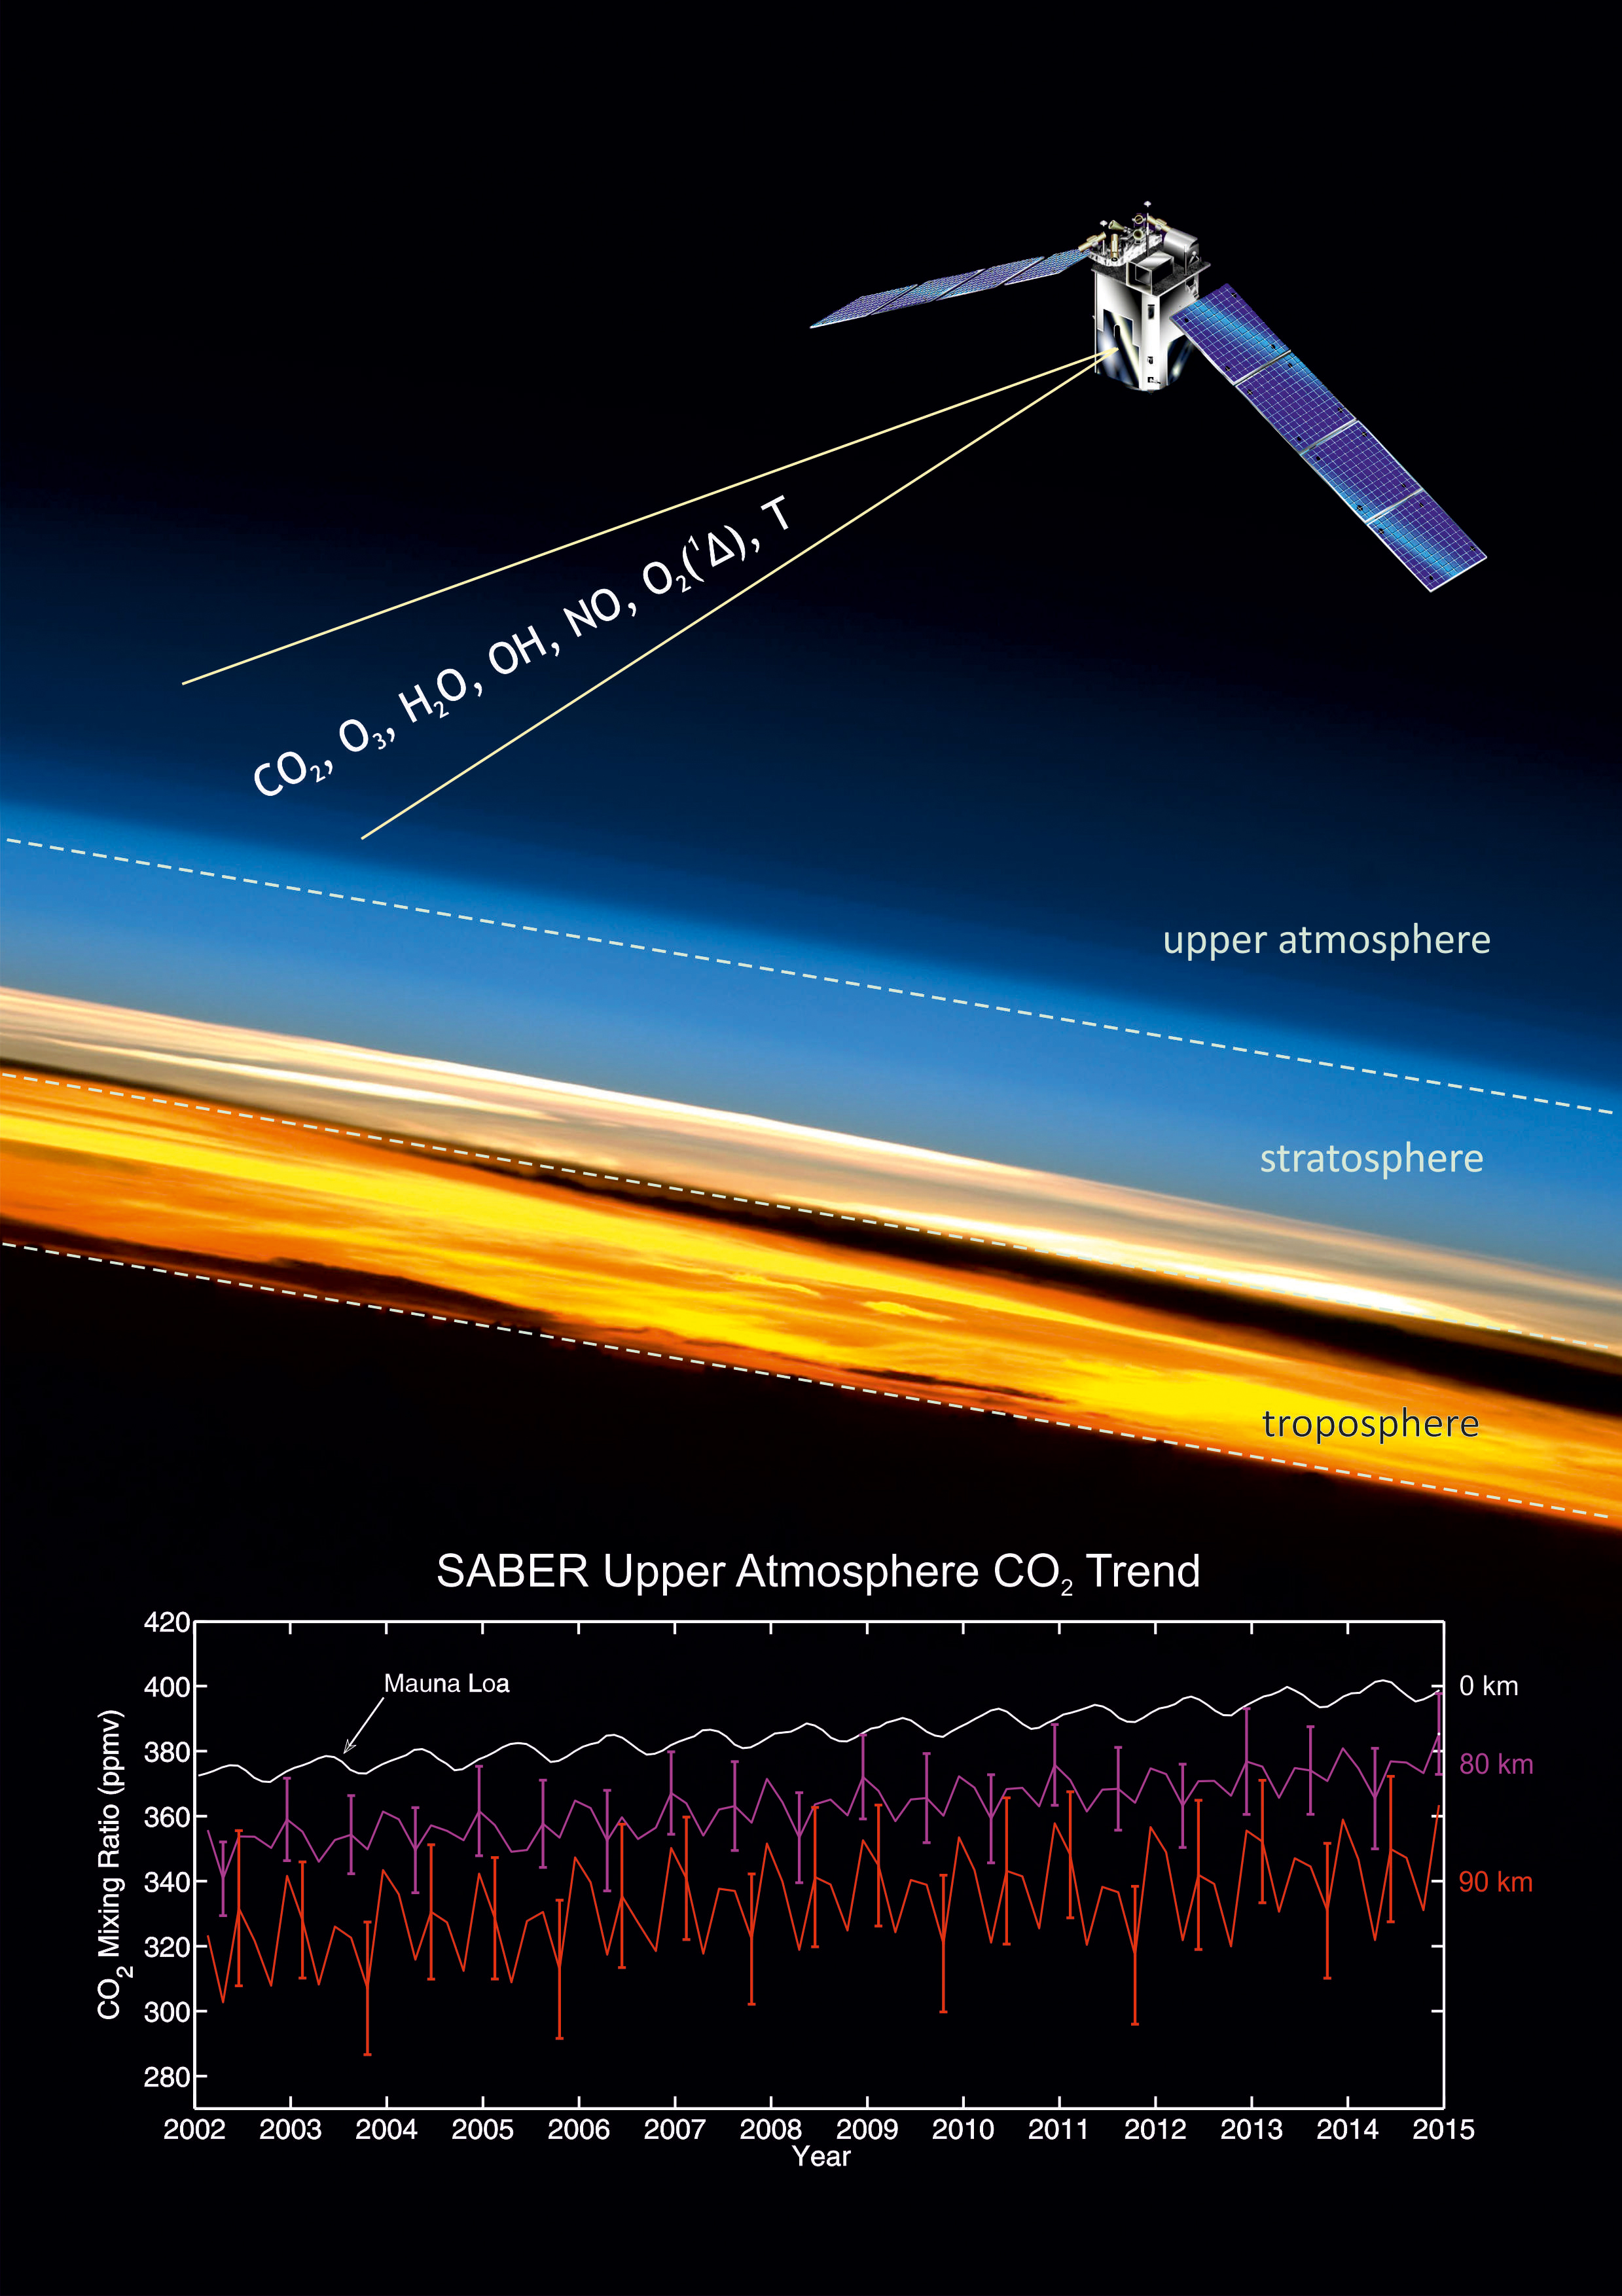 Graphic with a spacecraft up in the top right over an image of the different layers of the Earth's atmosphere and a graph of carbon dioxide levels at the bottom